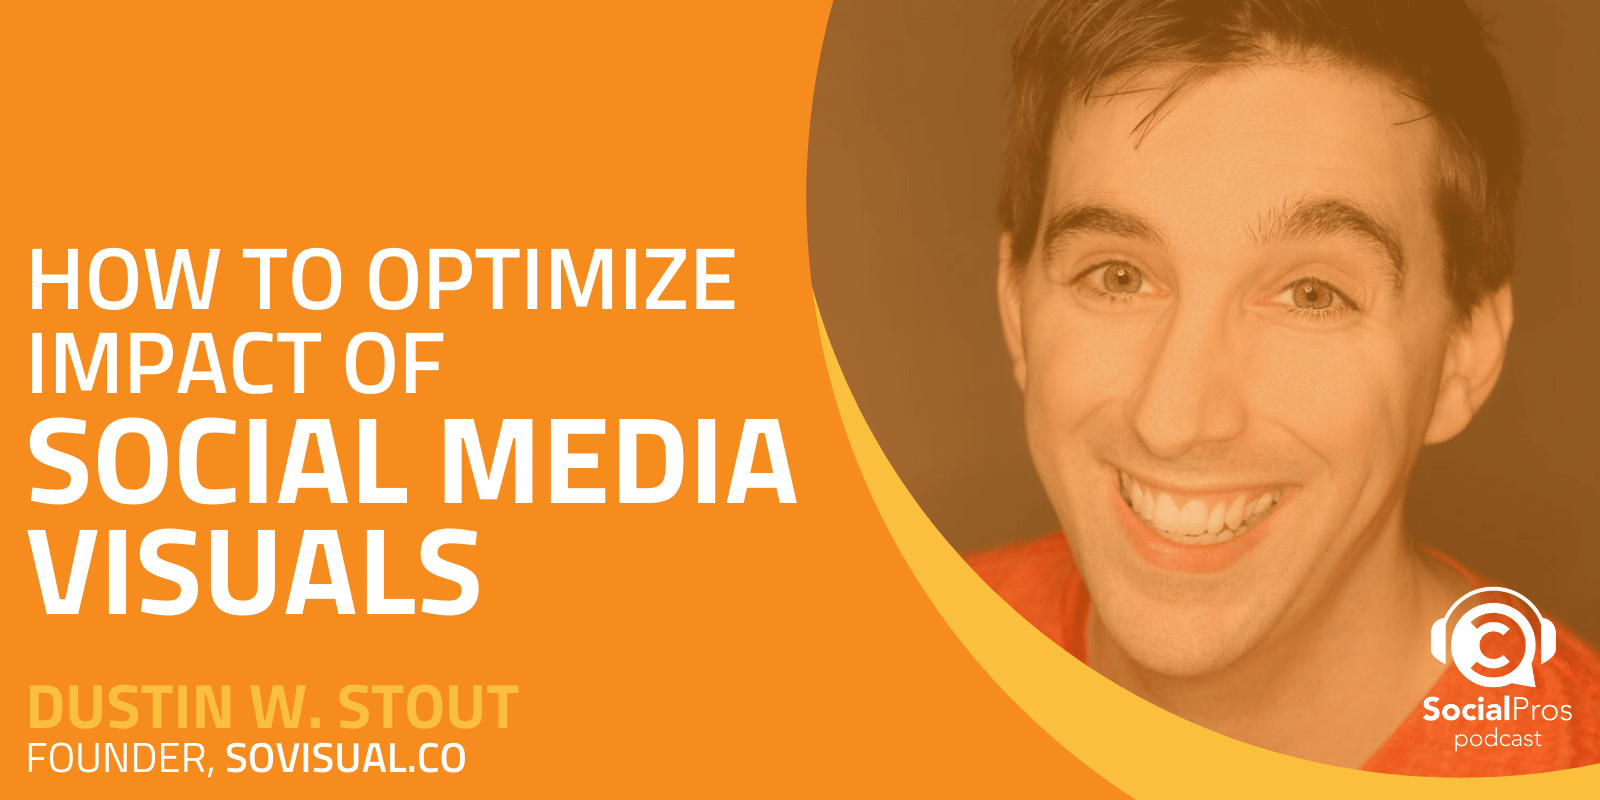 How to Optimize Impact of Social Media Visuals